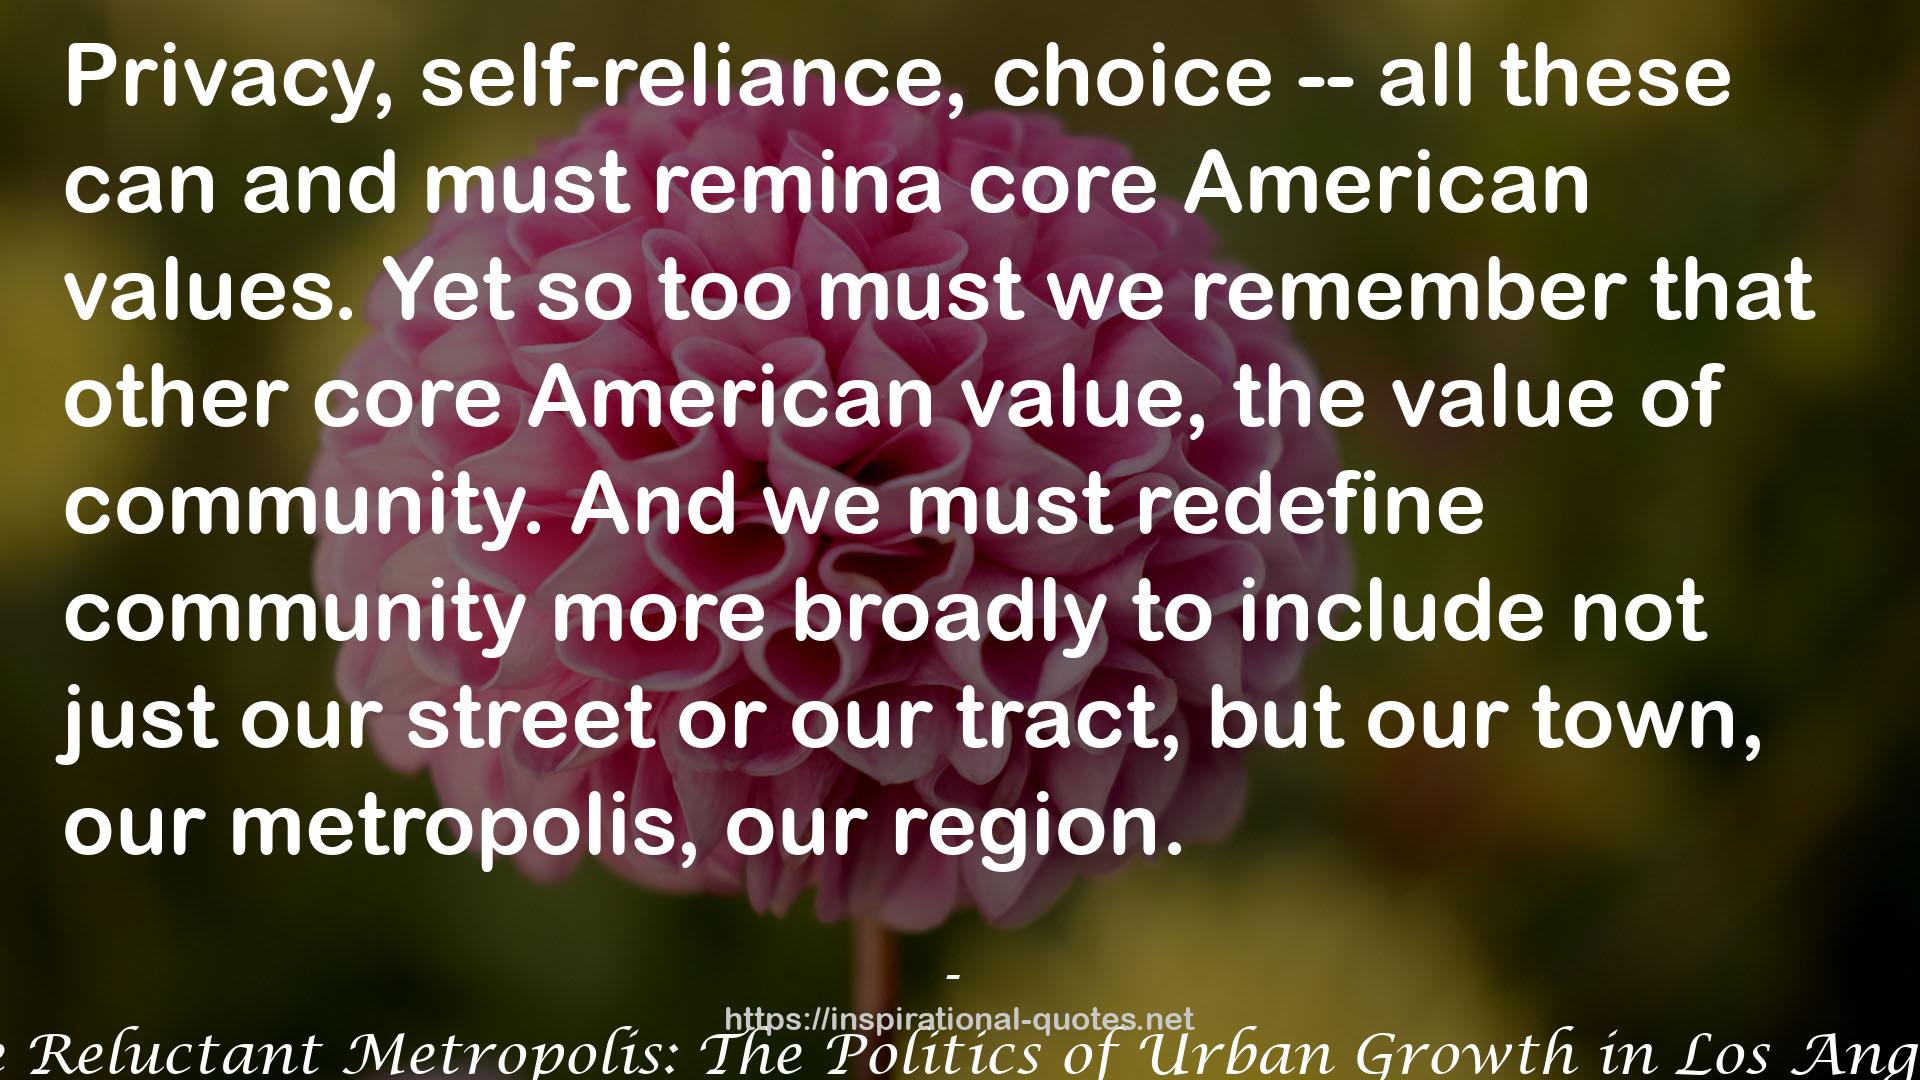 The Reluctant Metropolis: The Politics of Urban Growth in Los Angeles QUOTES